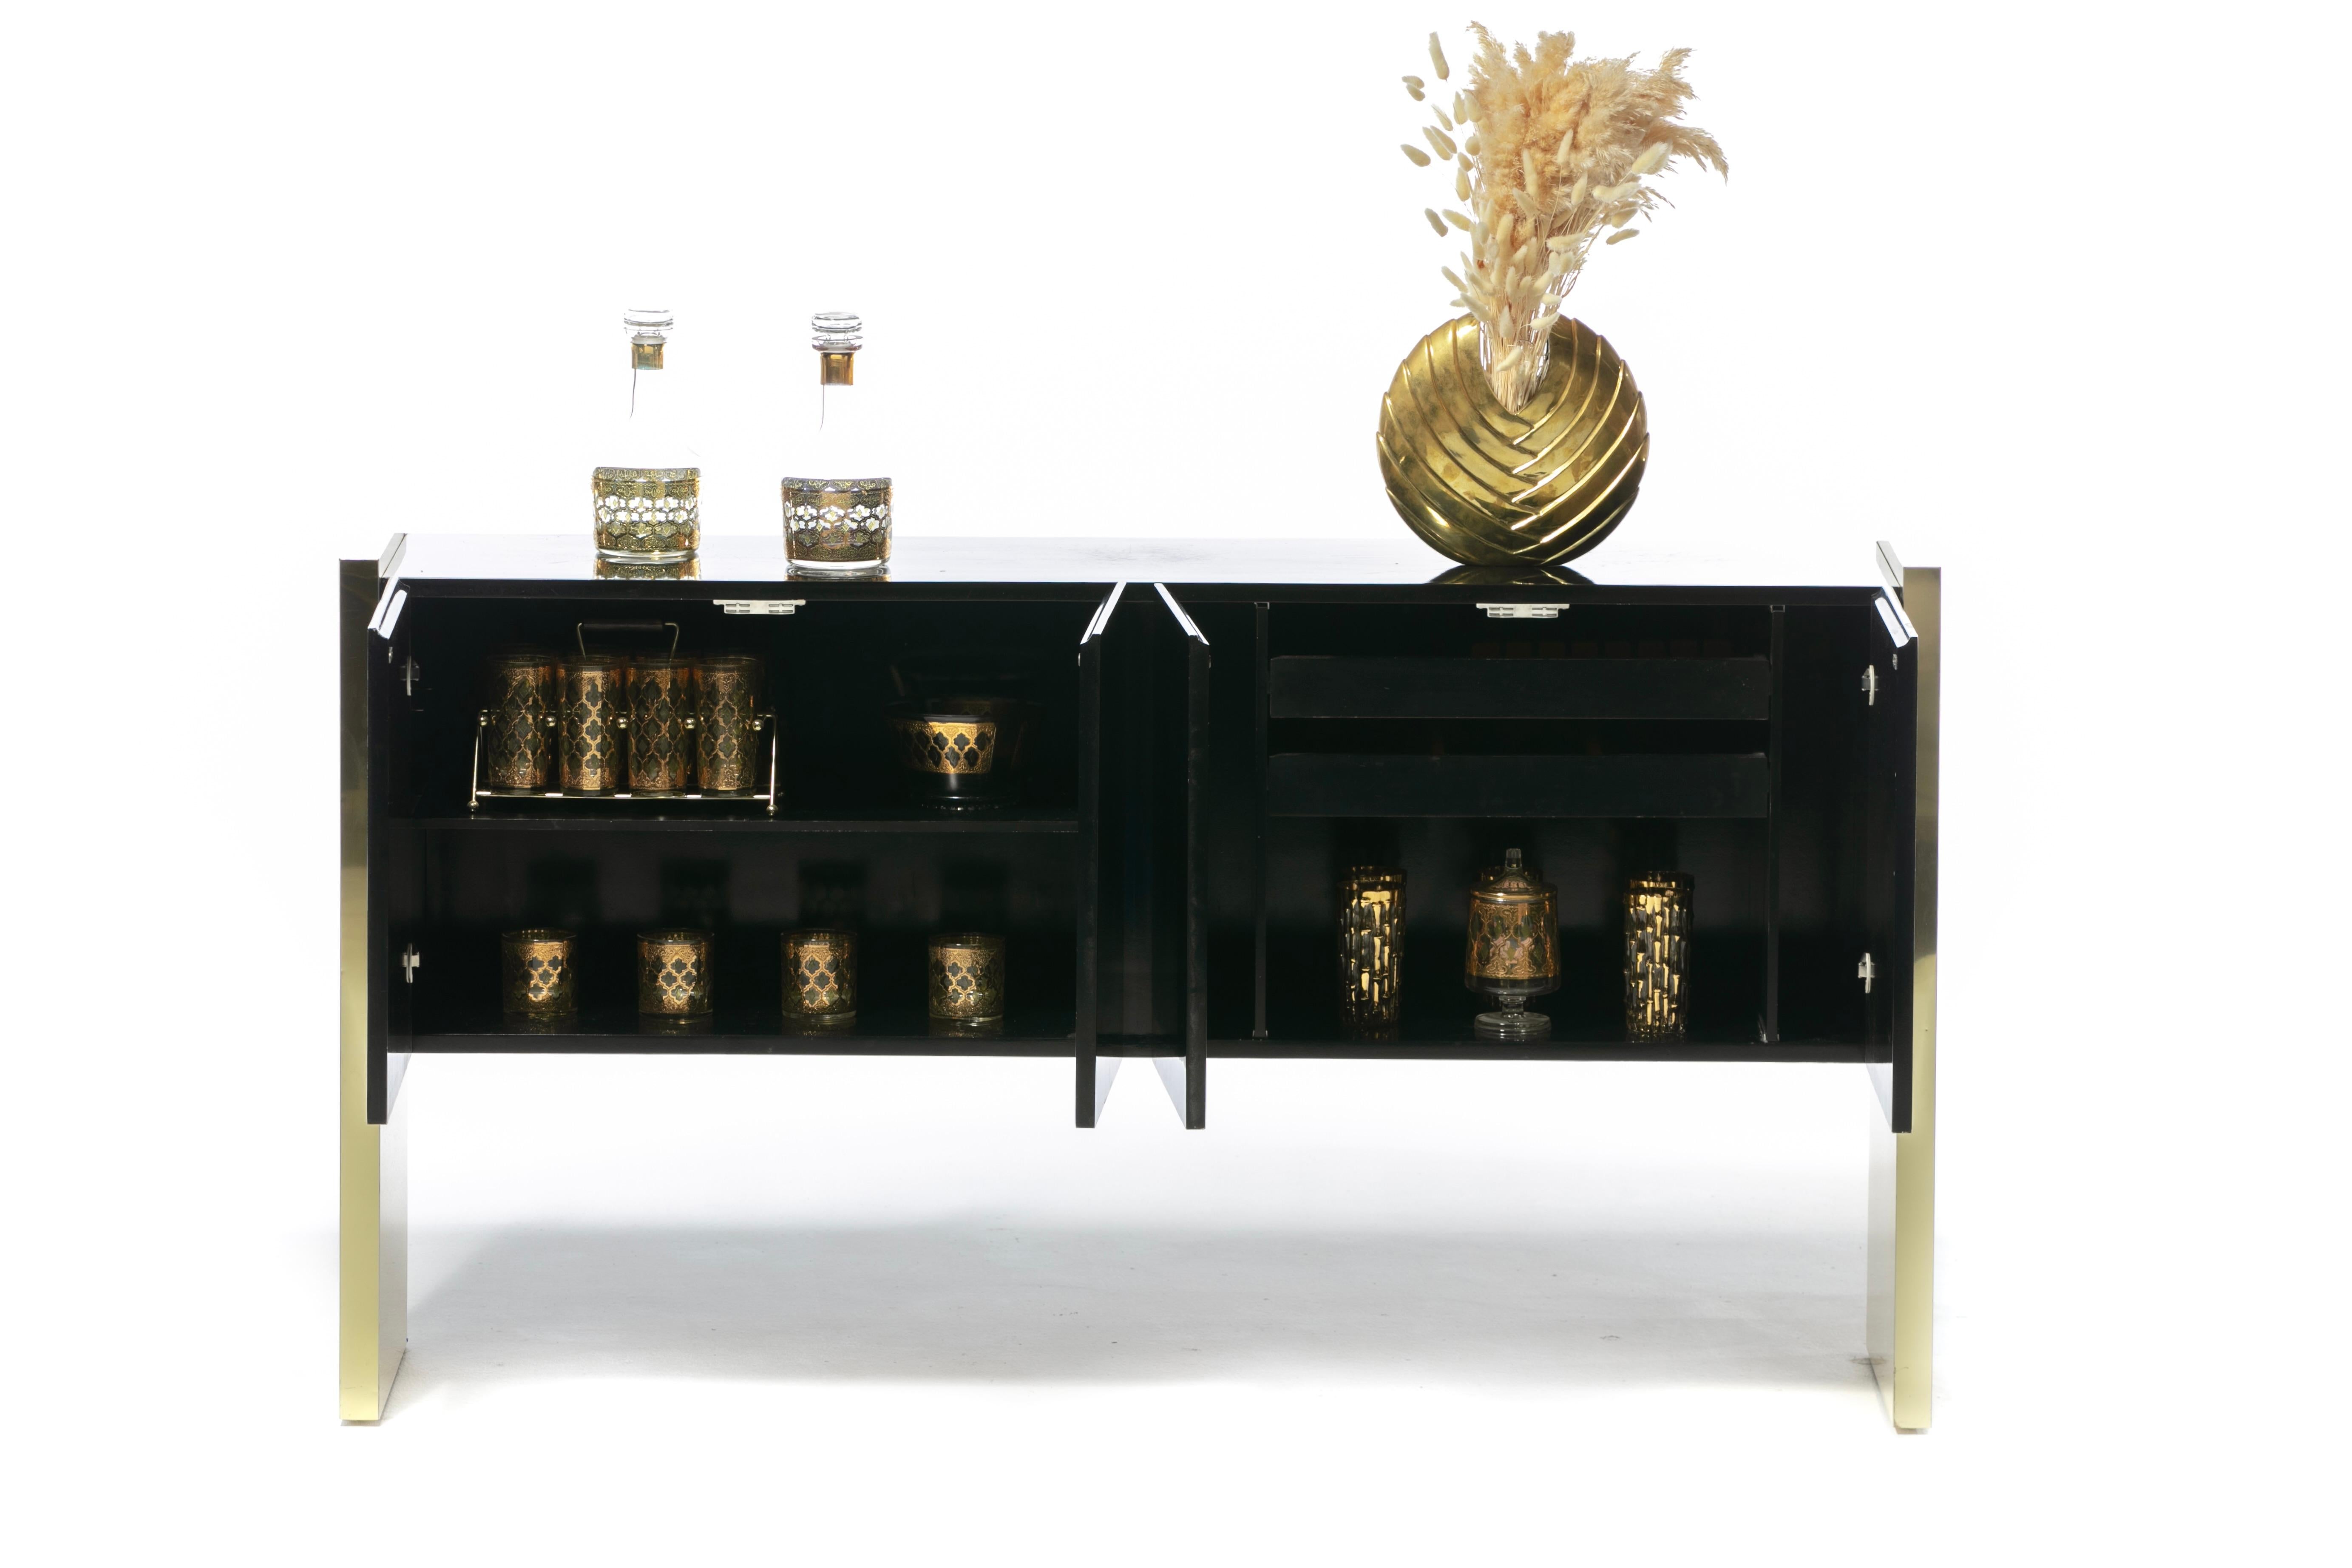 Sleek Milo Baughman black lacquered credenza or sideboard with tall brass slab legs made by Thayer Coggin in the 1970s. Elegant Modern profile. The look is powerful and upscale. Black lacquered cabinet seems to float between two large rectangular